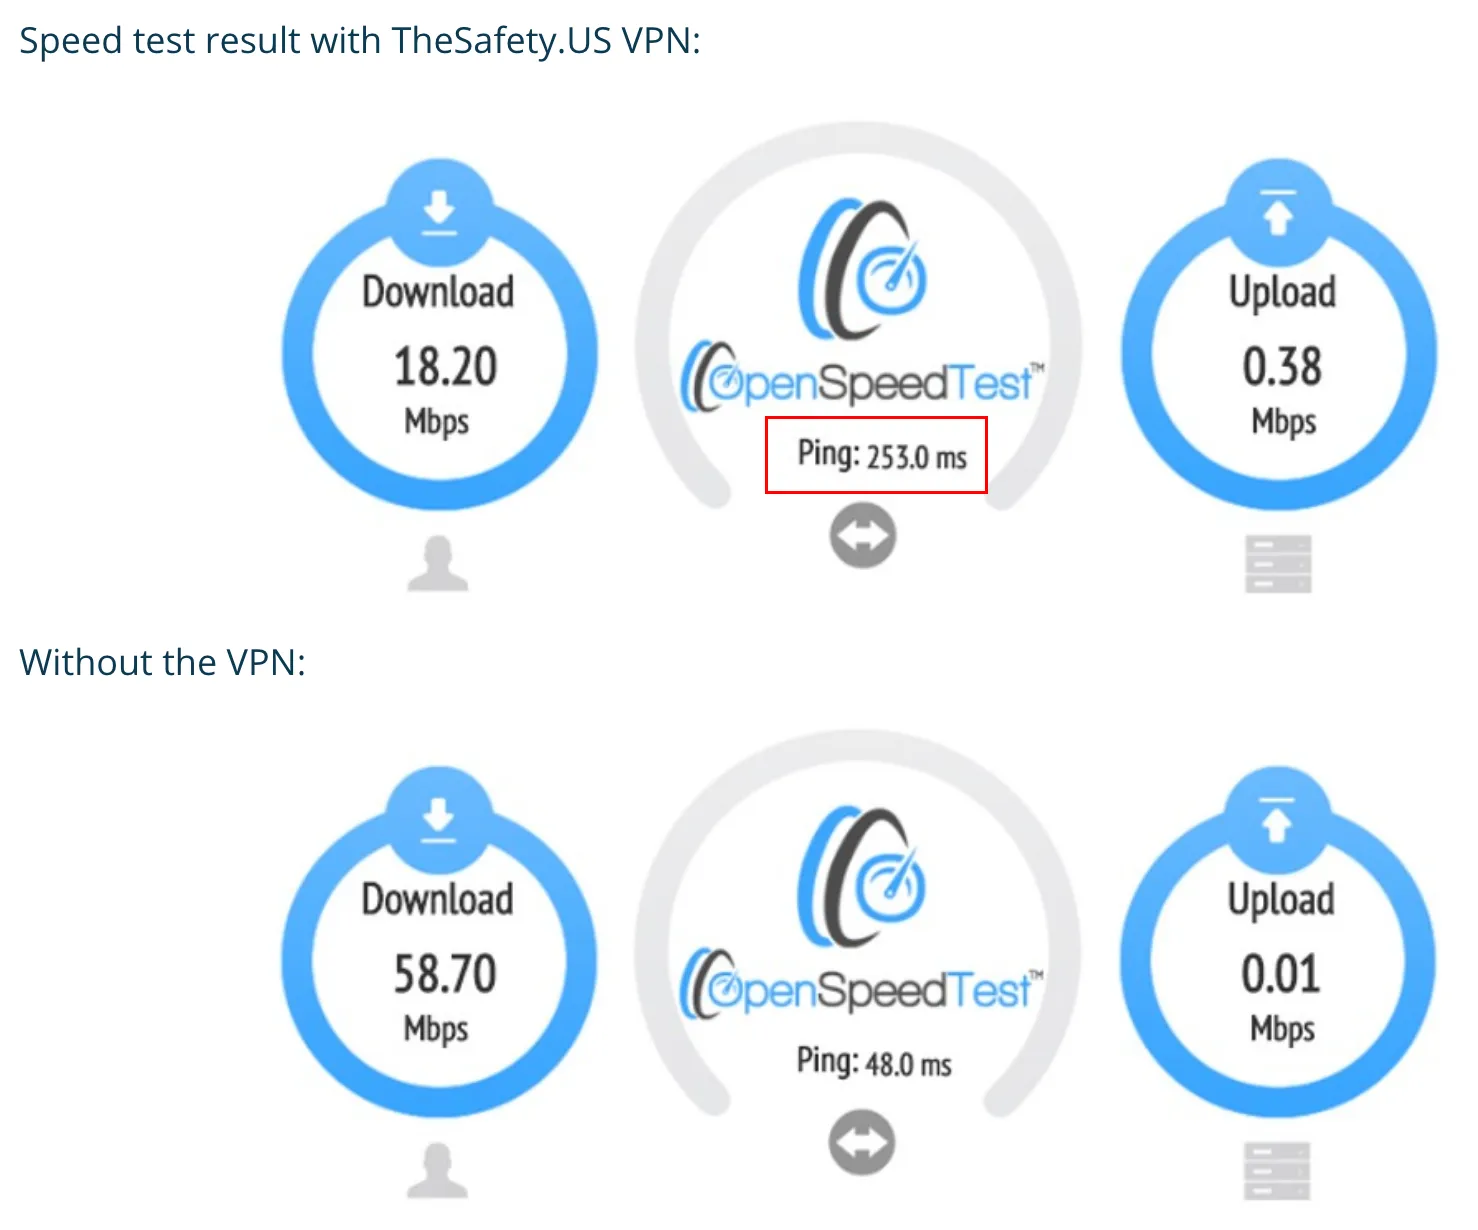 The fastest VPN service TheSafety.US